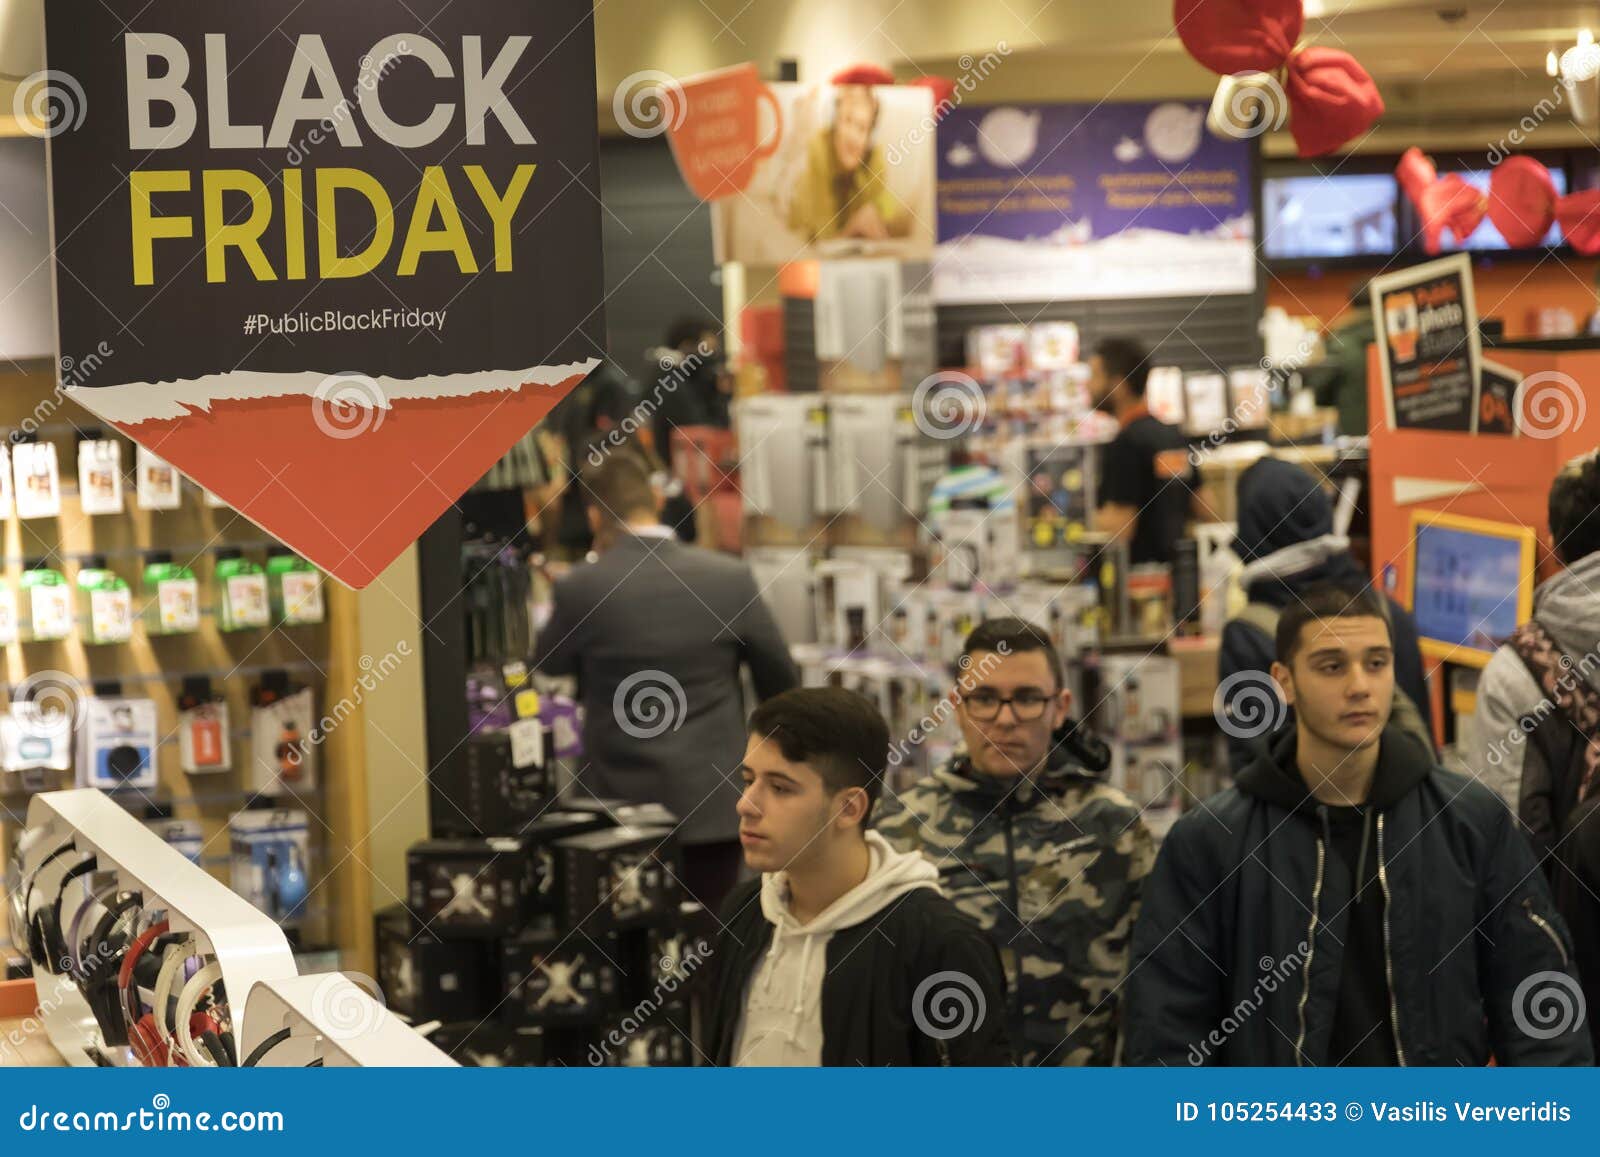 People Shop Inside a Department Store during Black Friday Shopping - What Department Stores Have Black Friday Deals